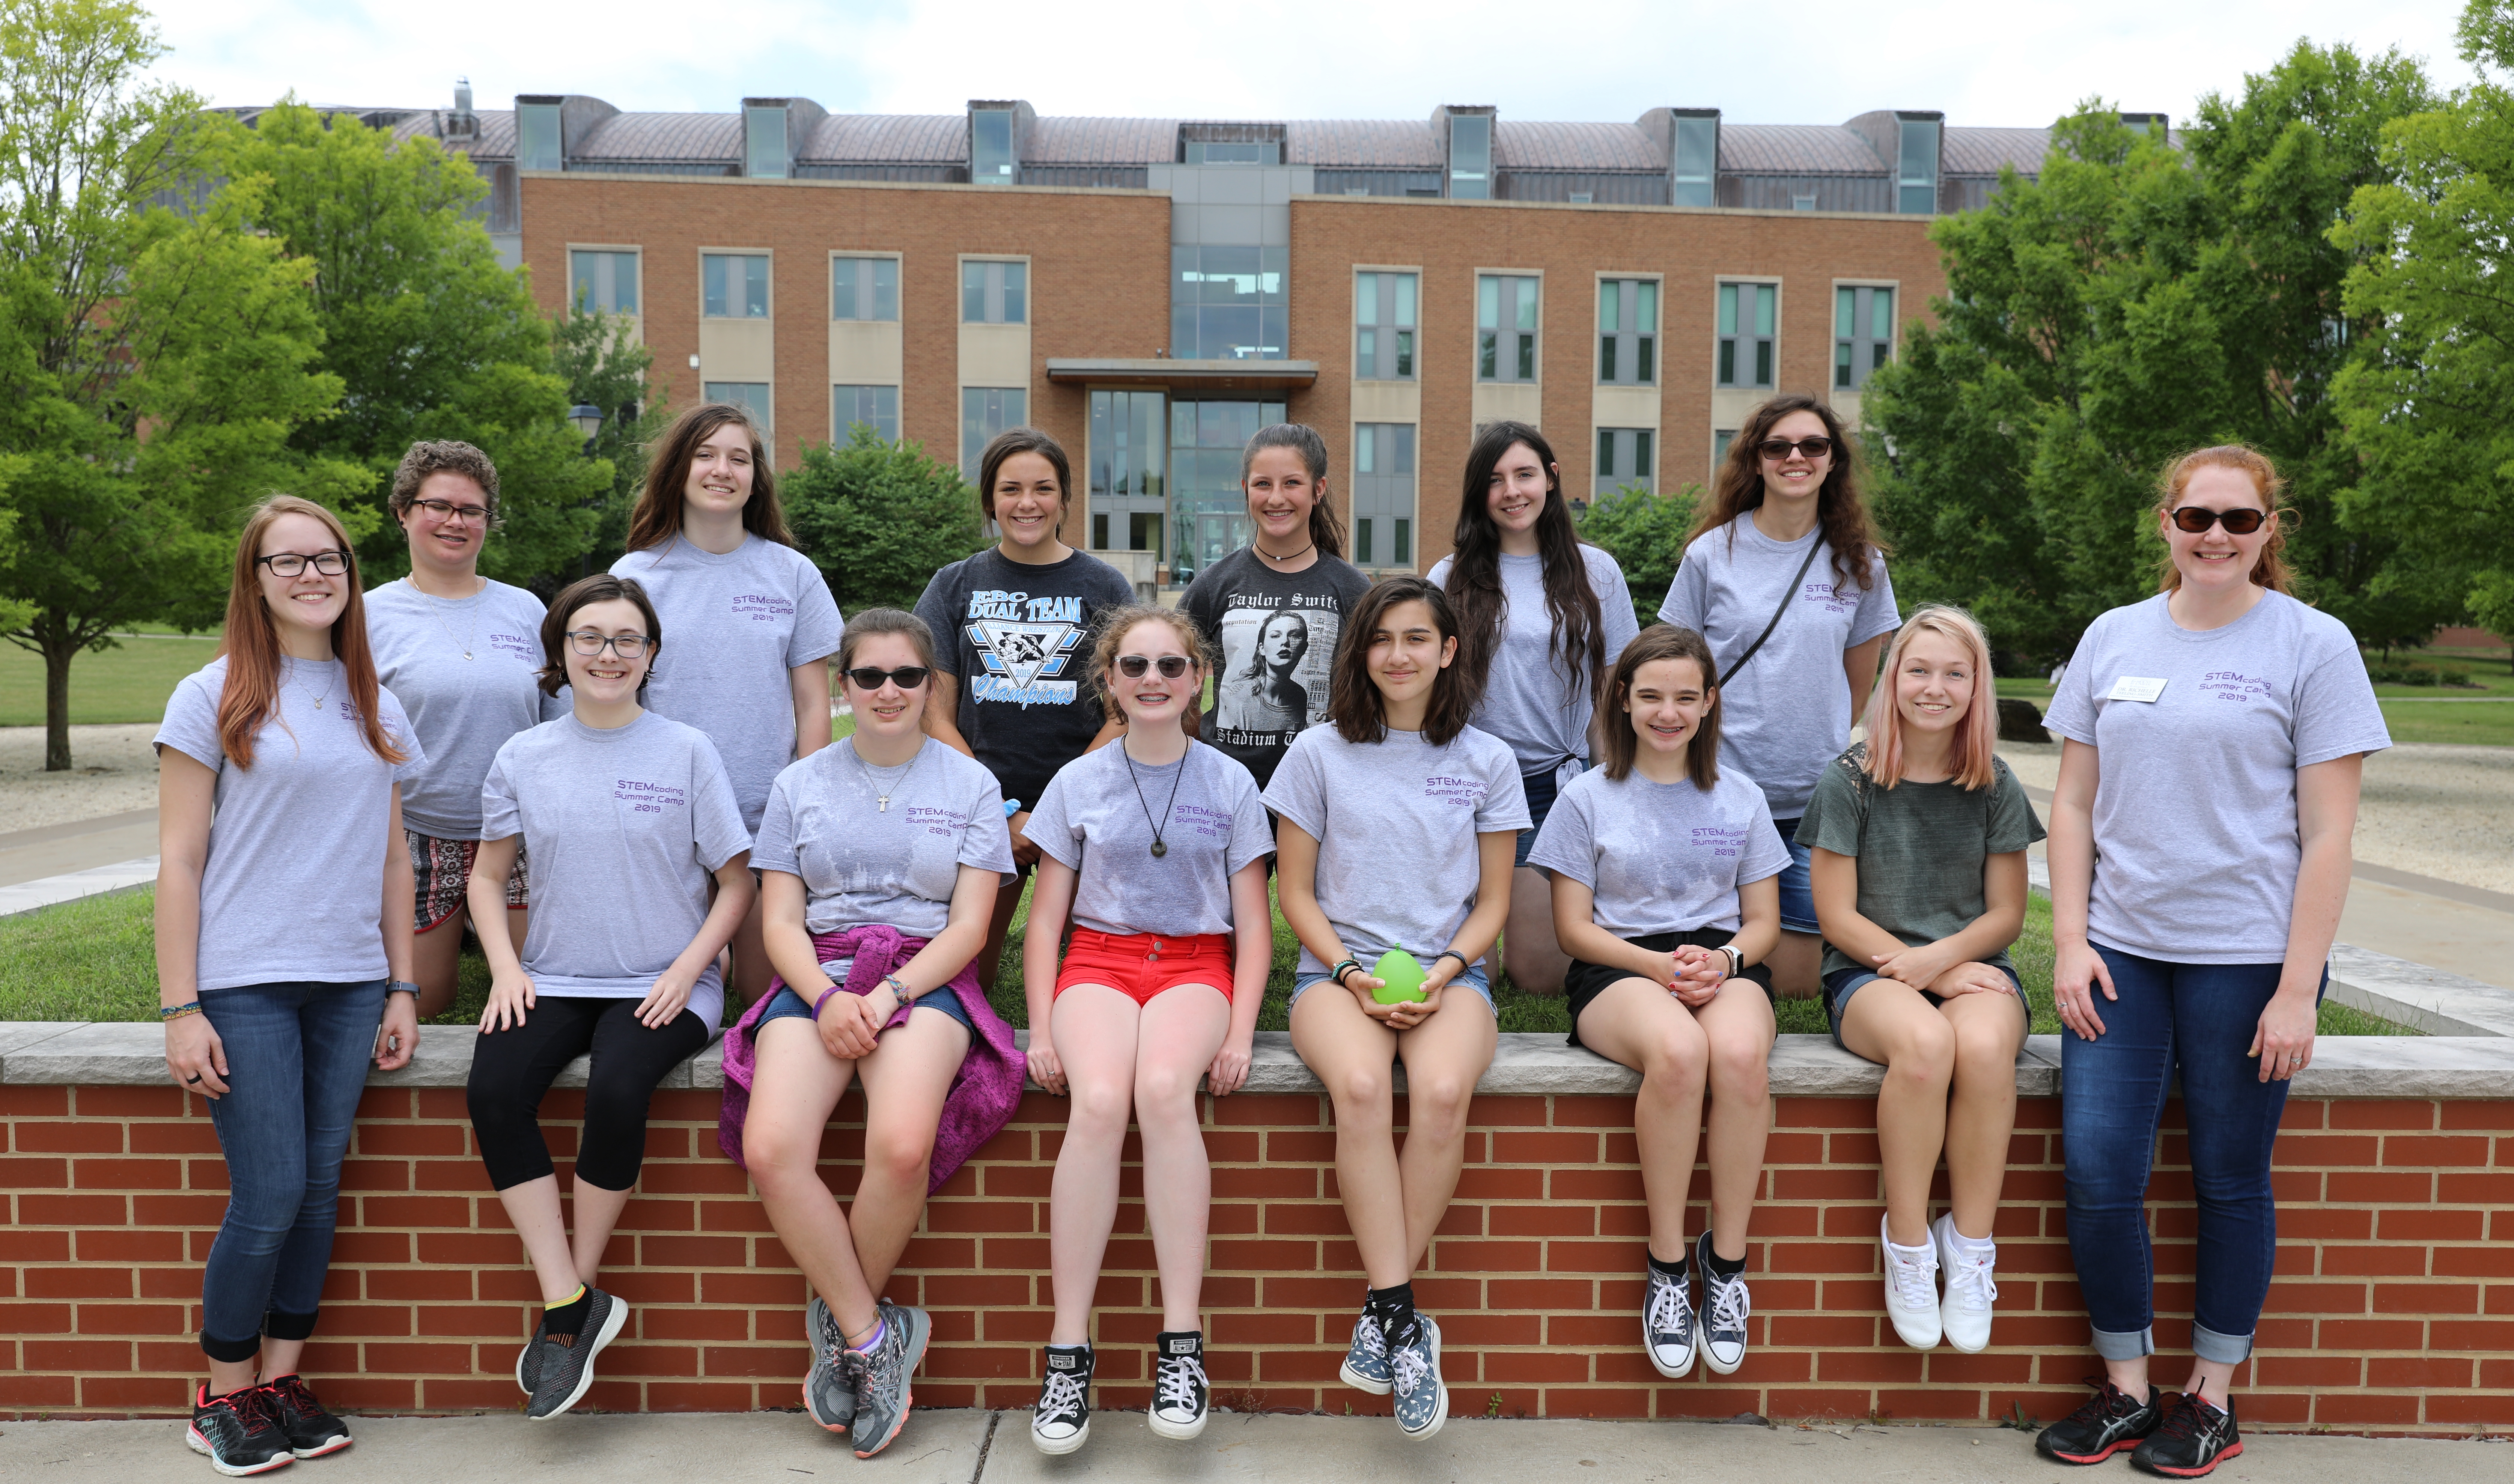 STEMcoding camp students at the university of mount union with program director Teeling-Smith